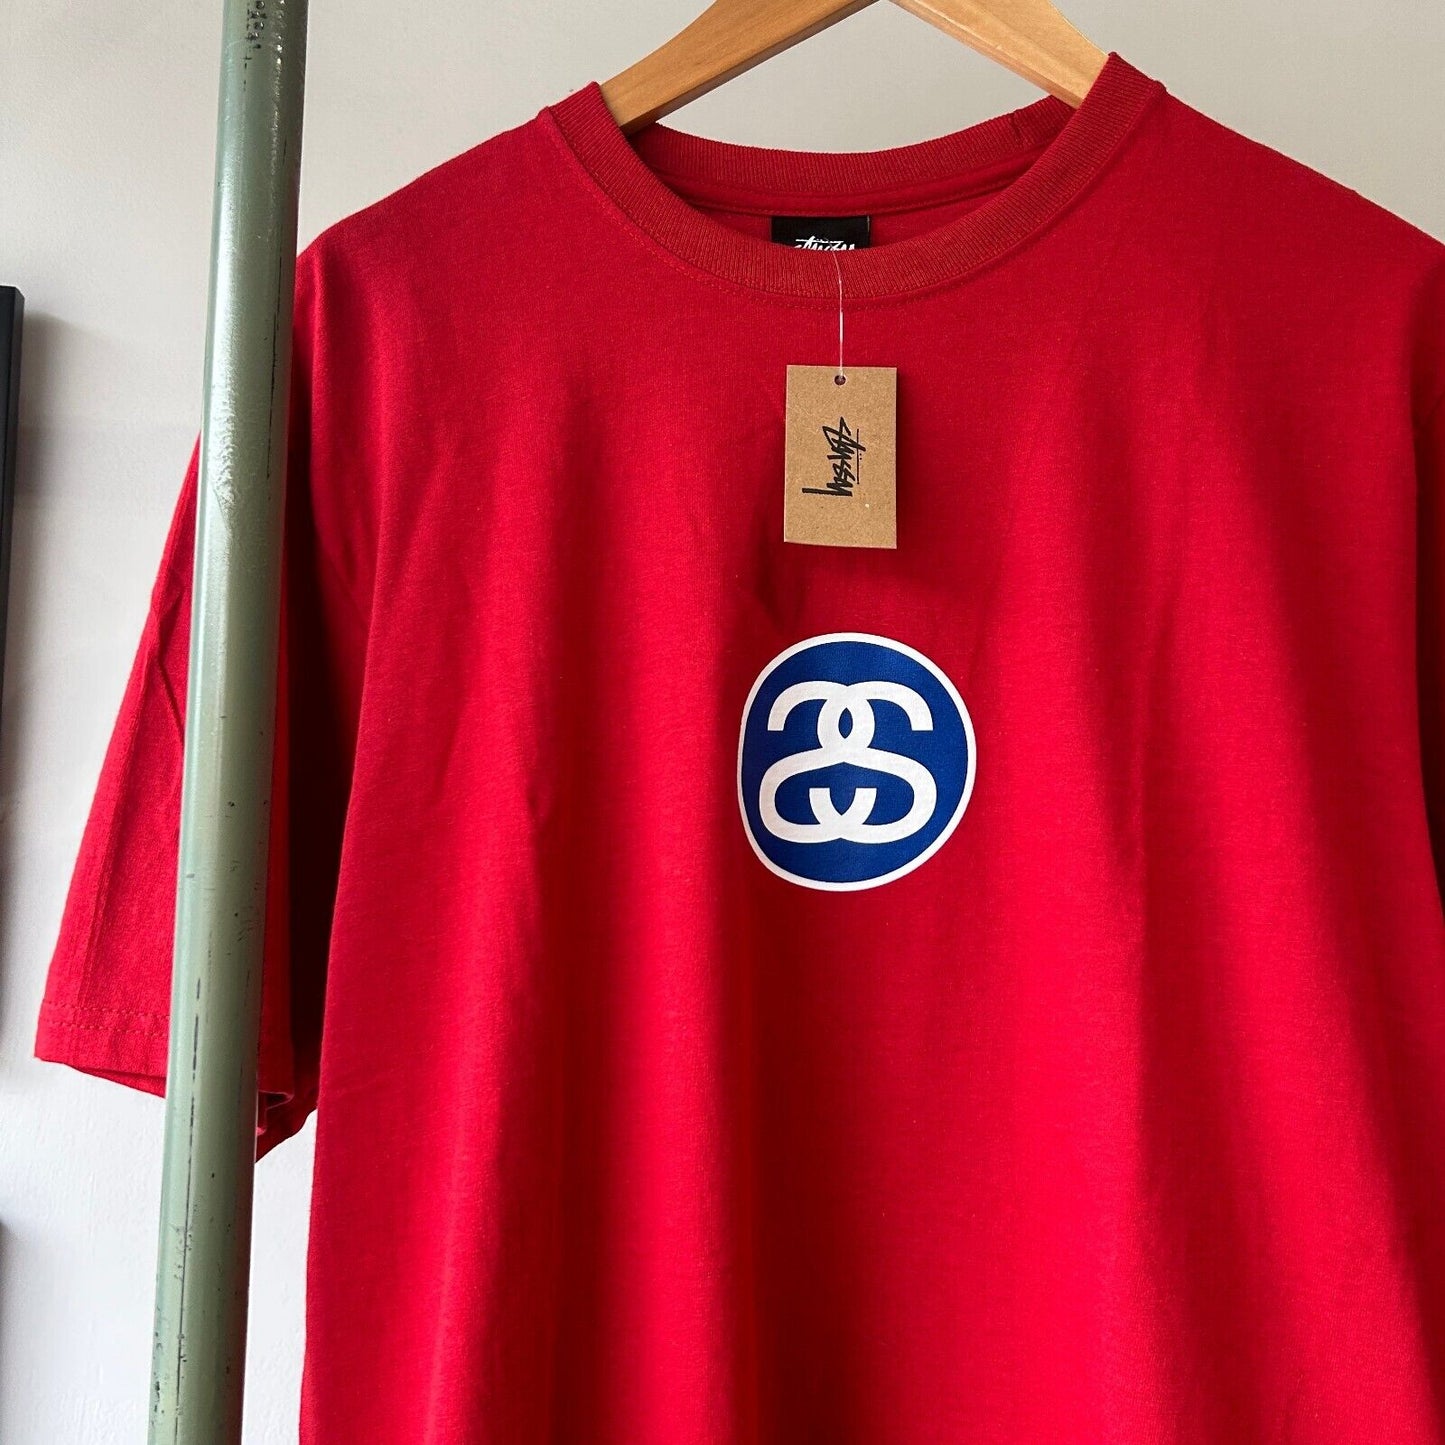 STUSSY SS-LINK Logo Red T-Shirt sz M Adult New With Tags